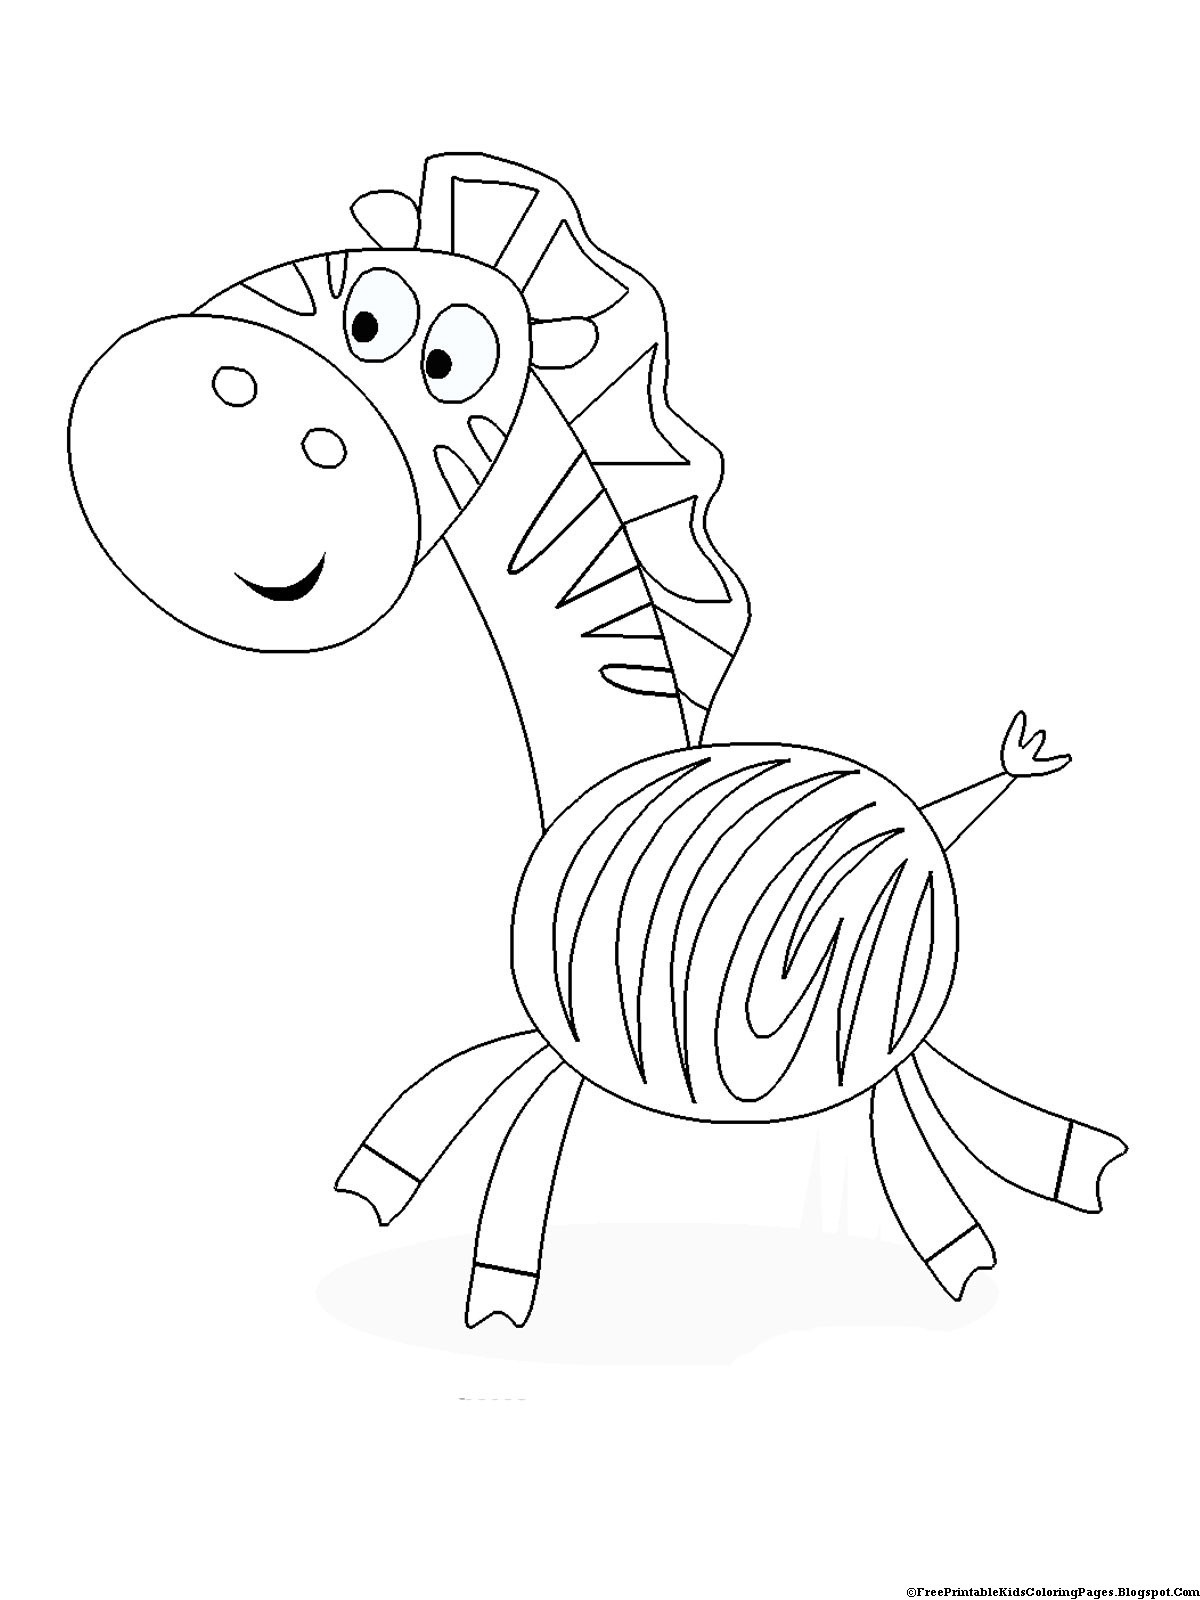 Printable Coloring Pages For Toddlers
 Zebra Coloring Pages